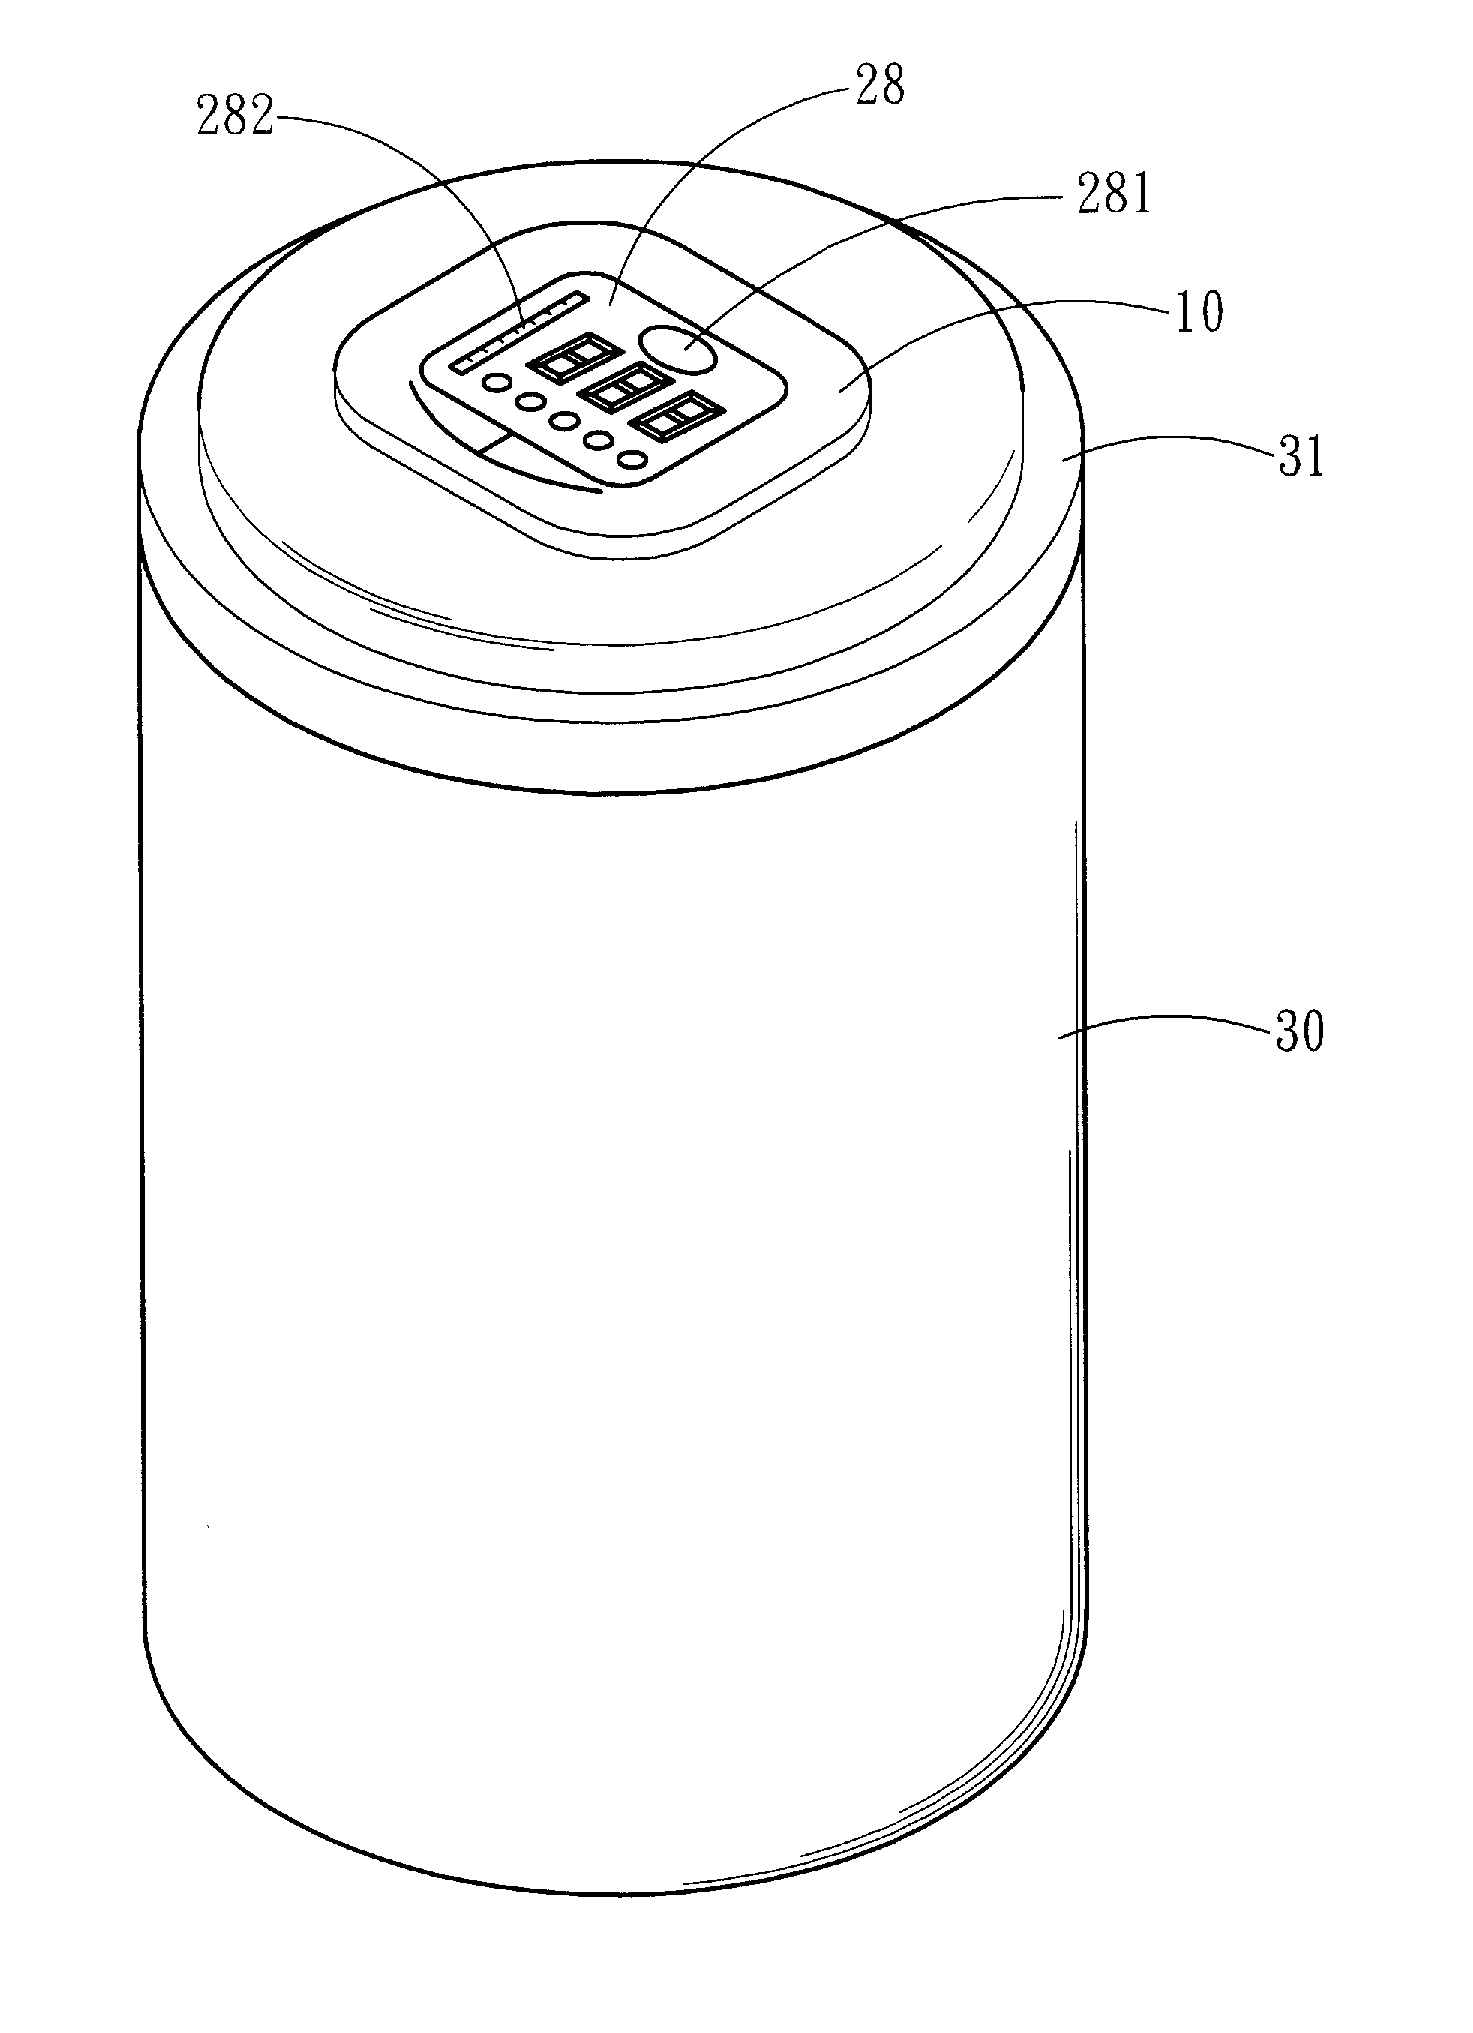 Method of active remiding water drinking